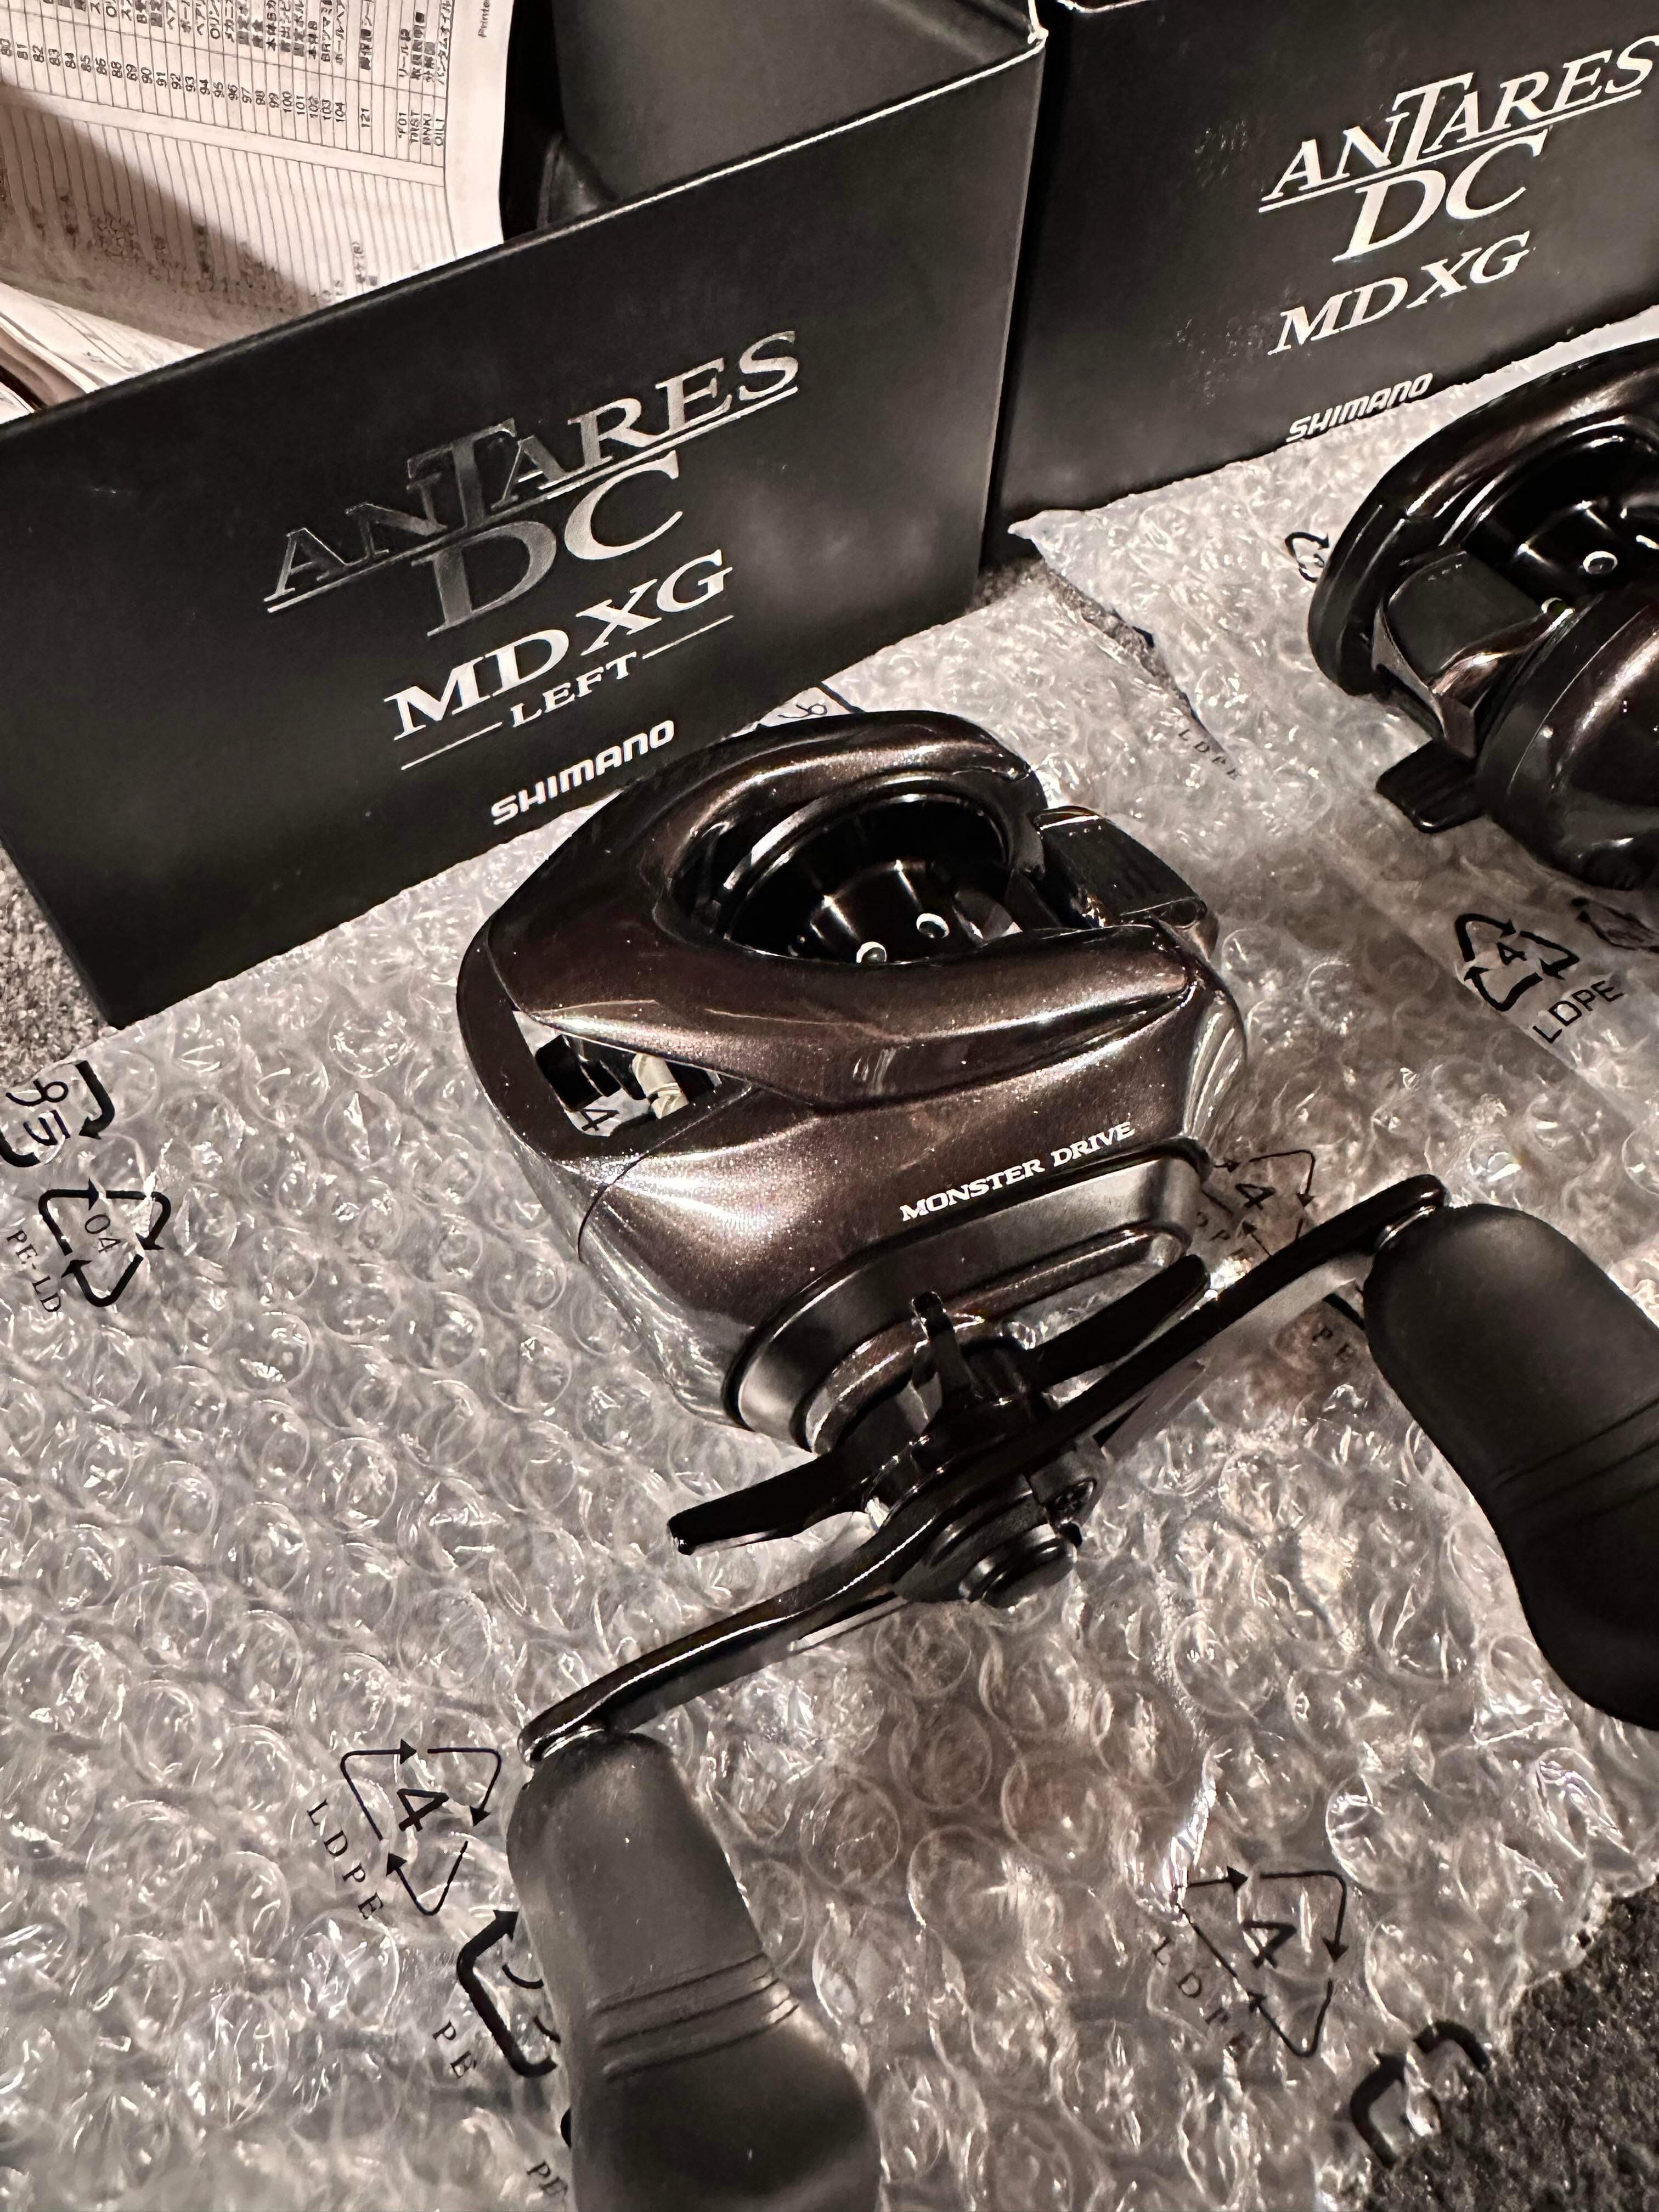 SHIMANO 18 ANTARES DC MD LEFT-